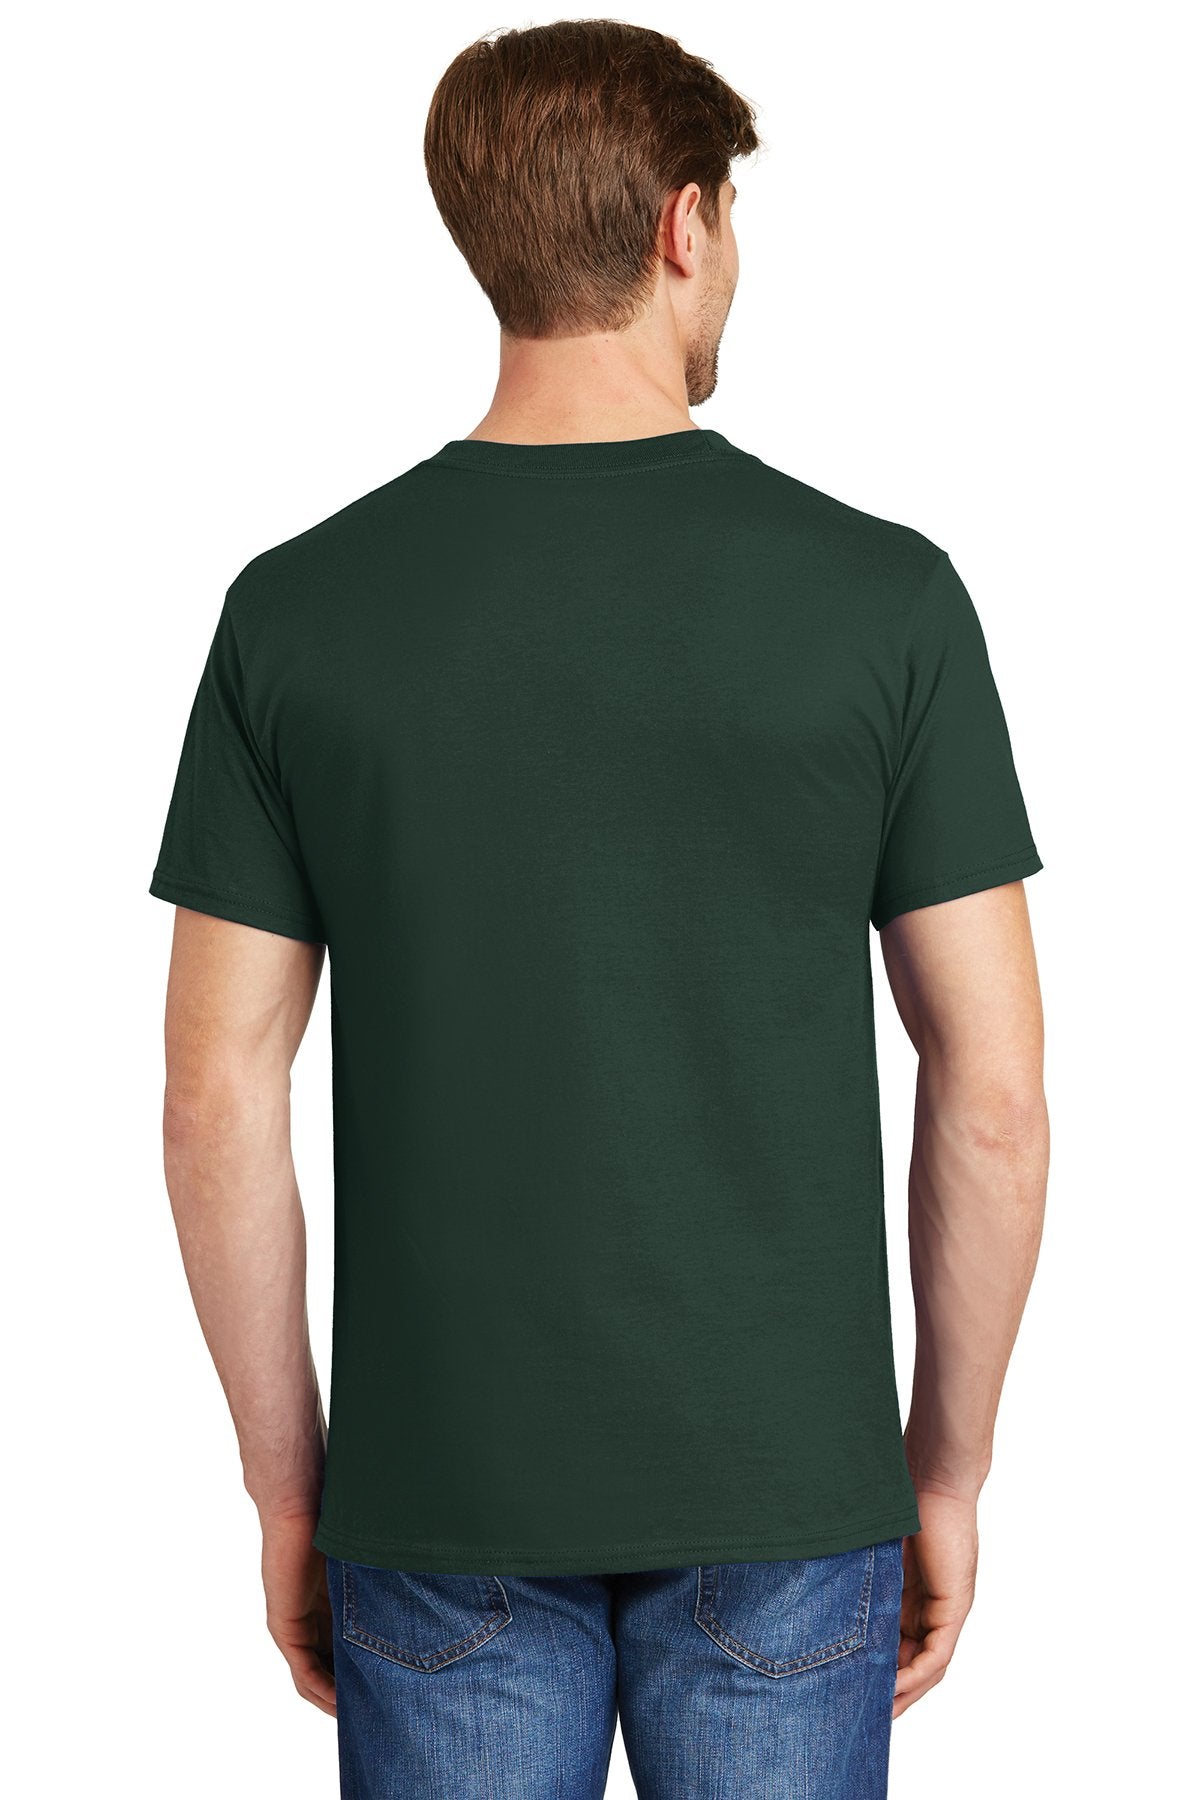 hanes beefy cotton t shirt with pocket 5190 deep forest